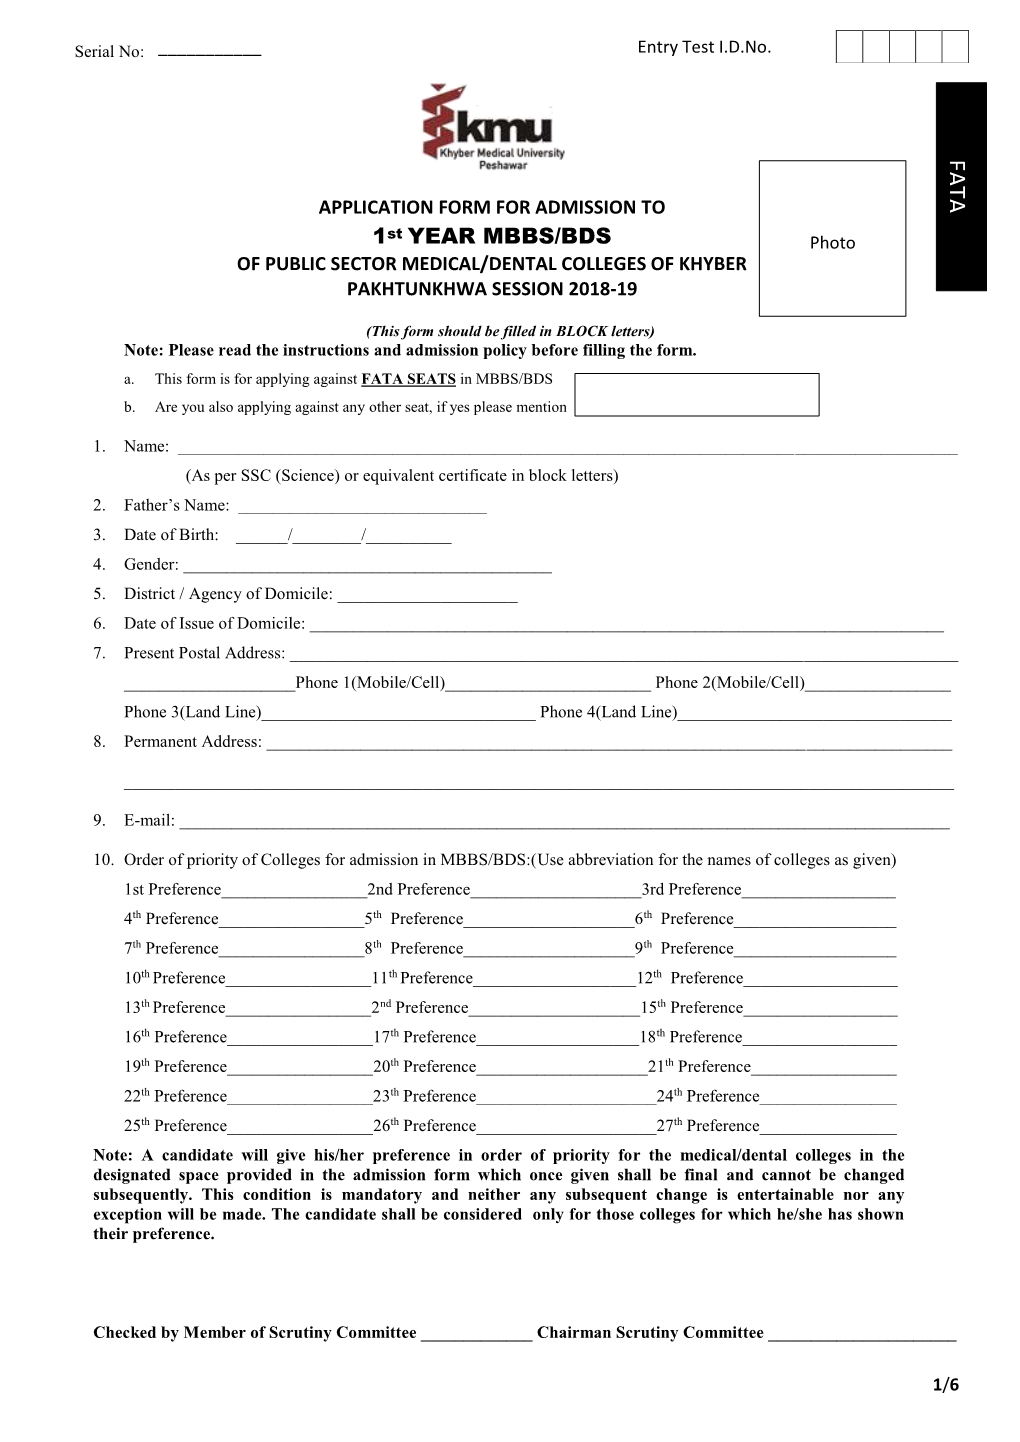 Application Form for FATA Seats